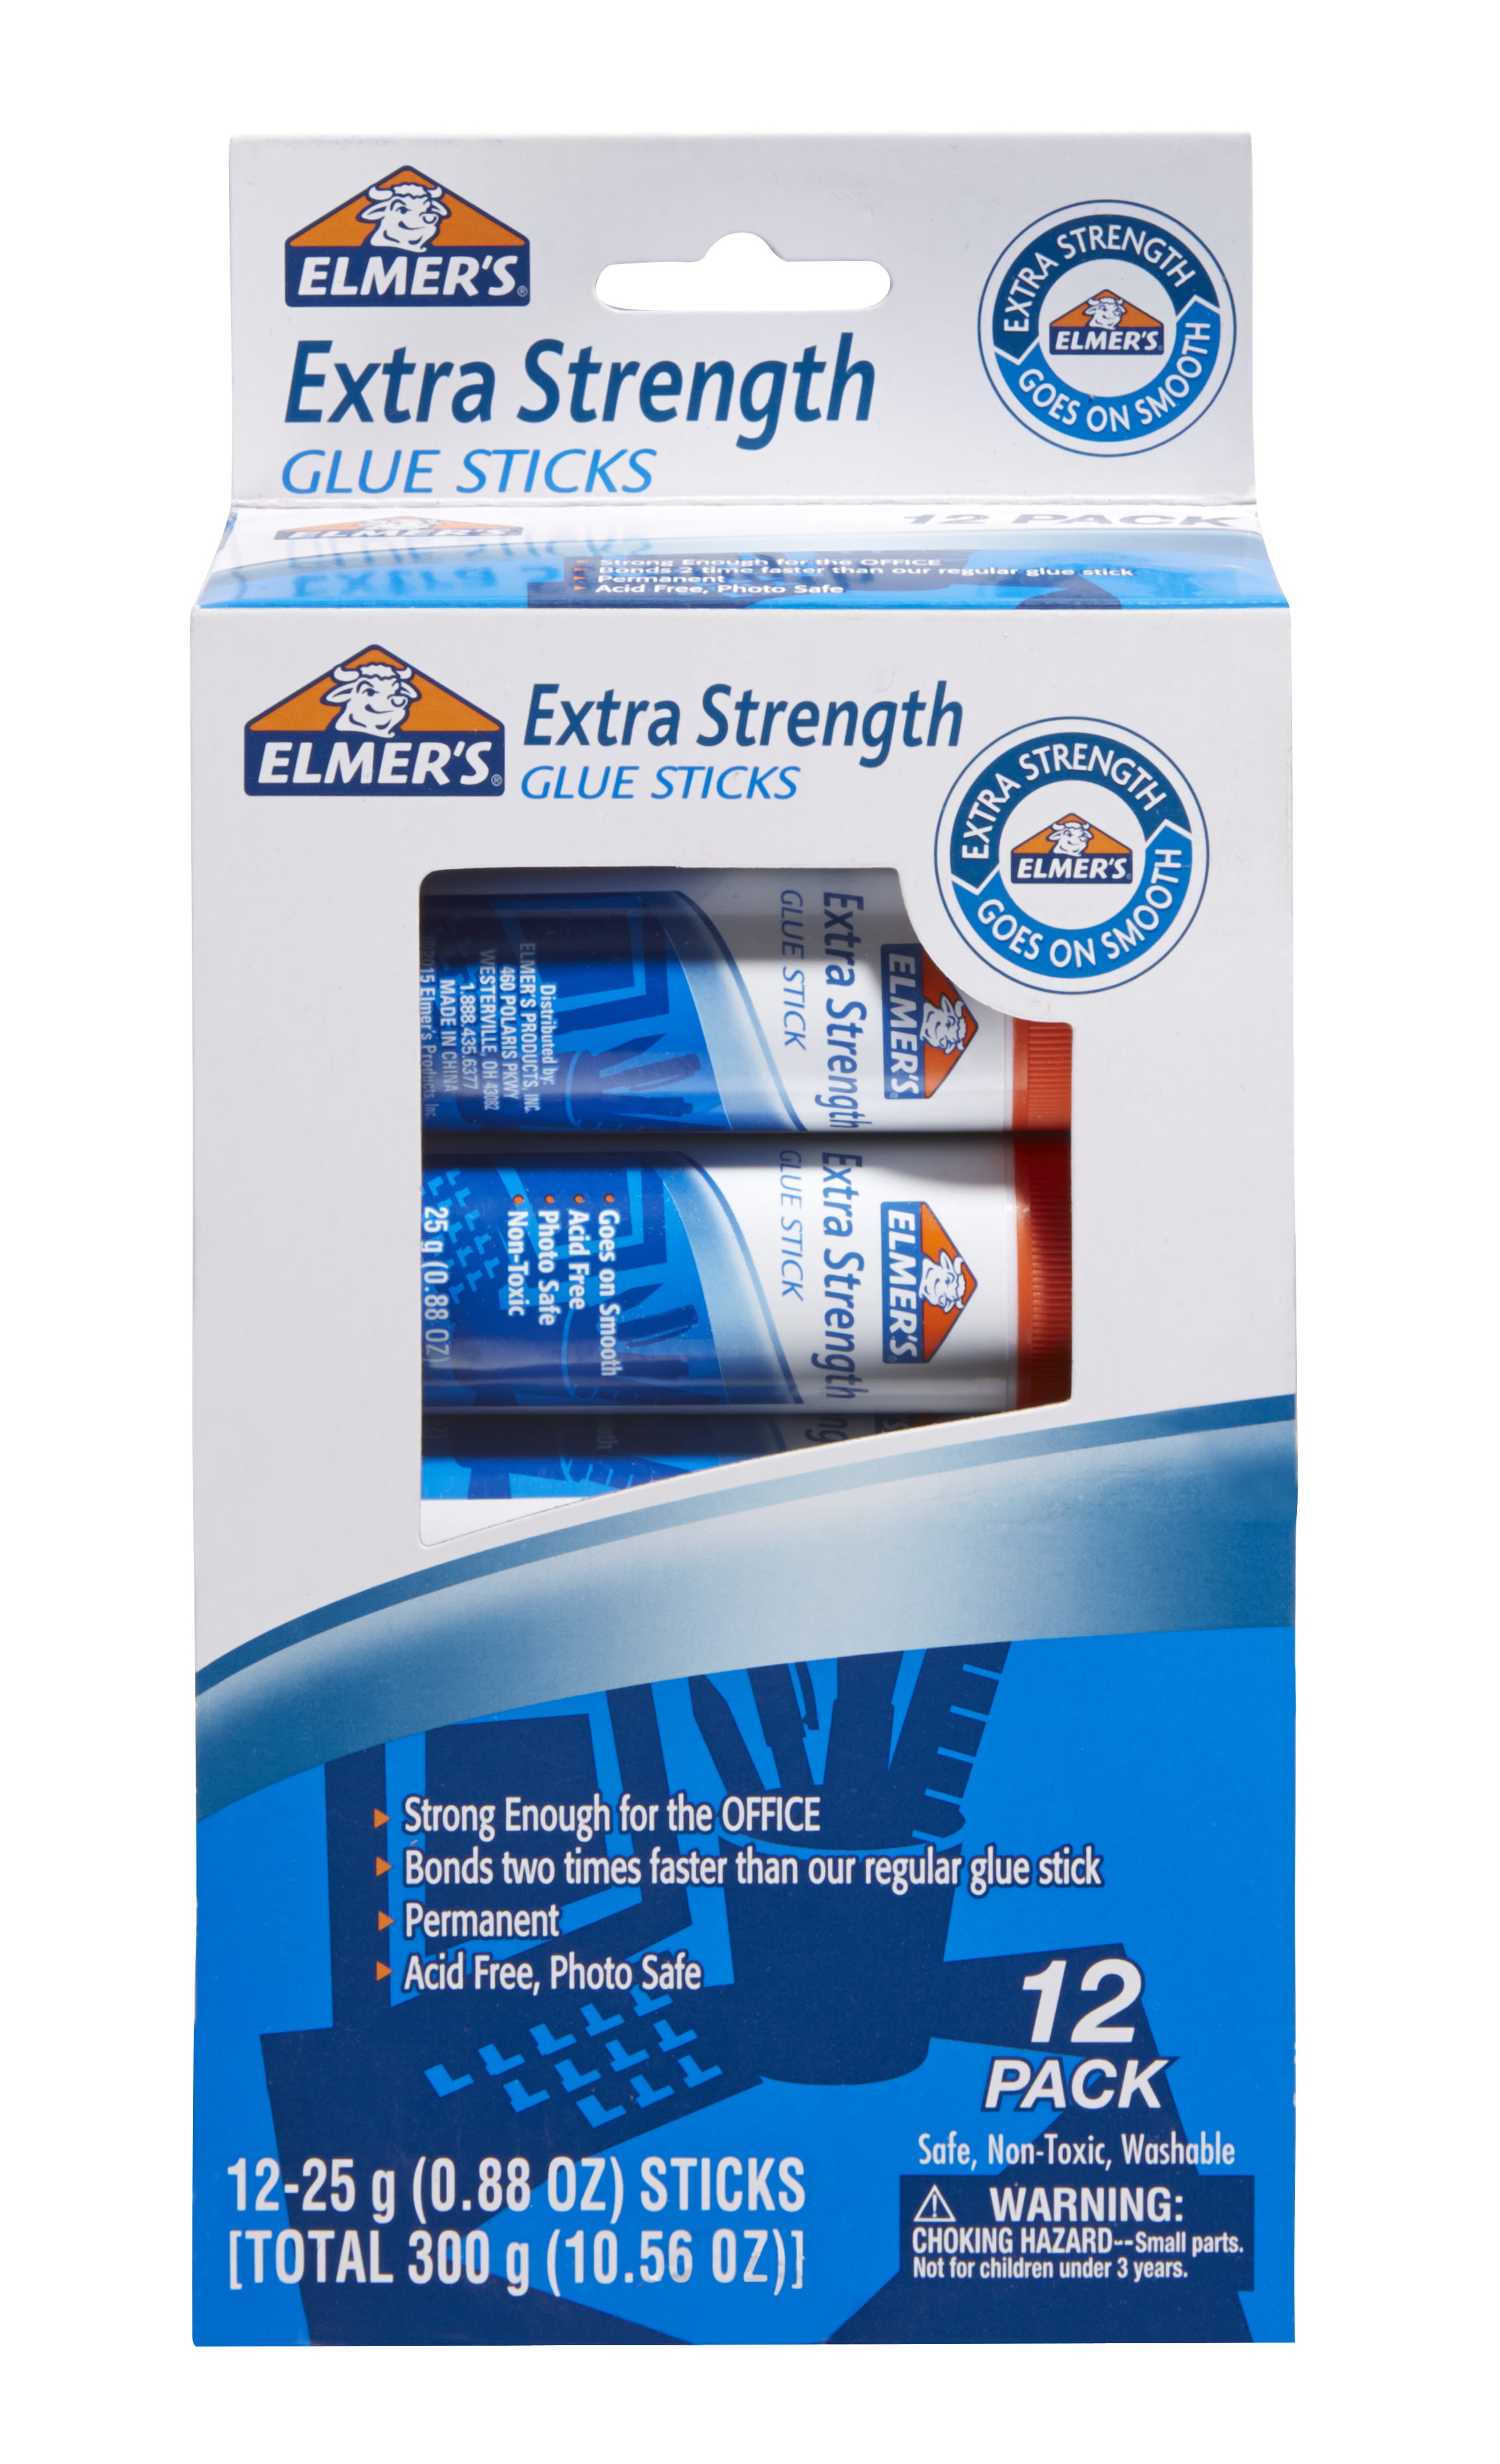 Elmer's Repositionable Poster & Picture Glue Stick, 0.88 oz, Dries Clear  (E623)